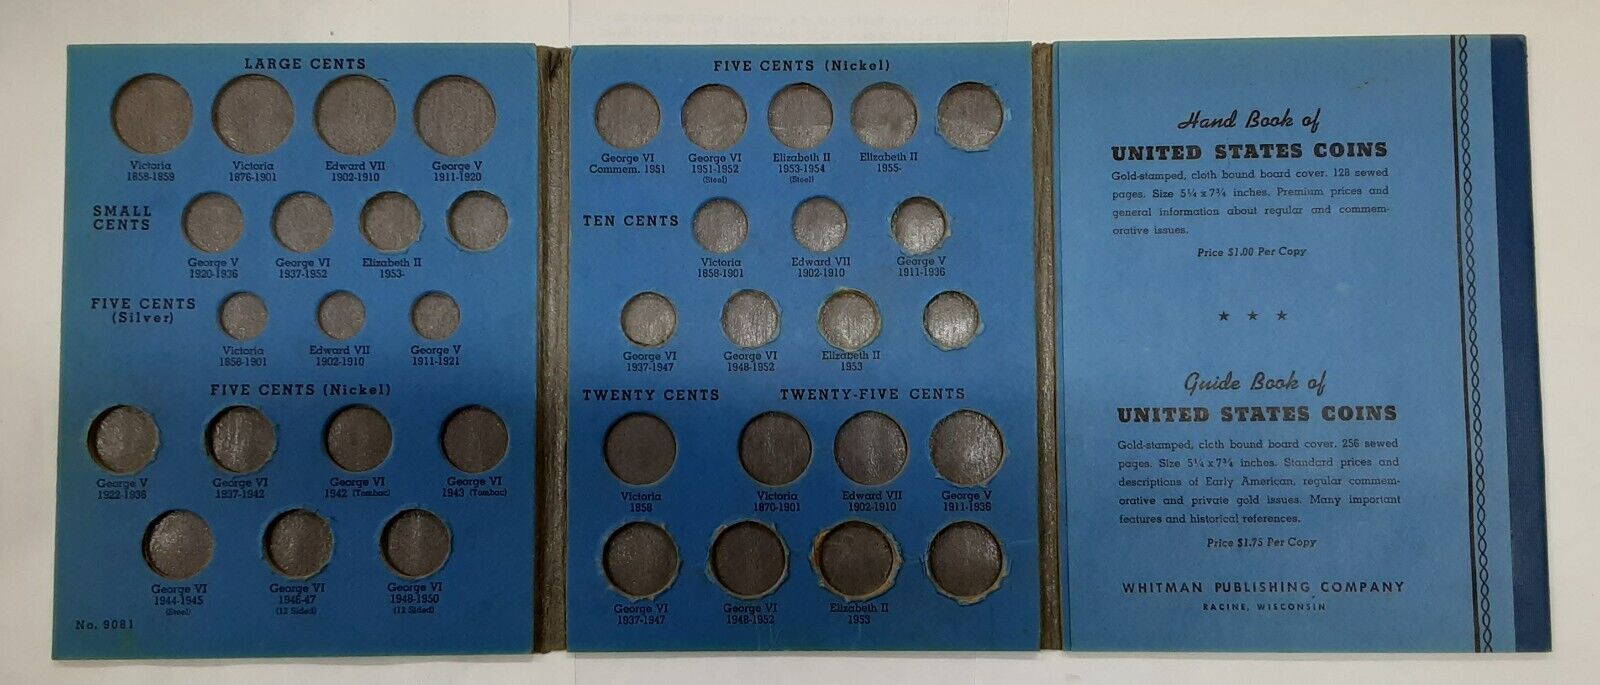 Empty Whitman Canadian Coin Type Collection Folder No.9081 Used *Rare*